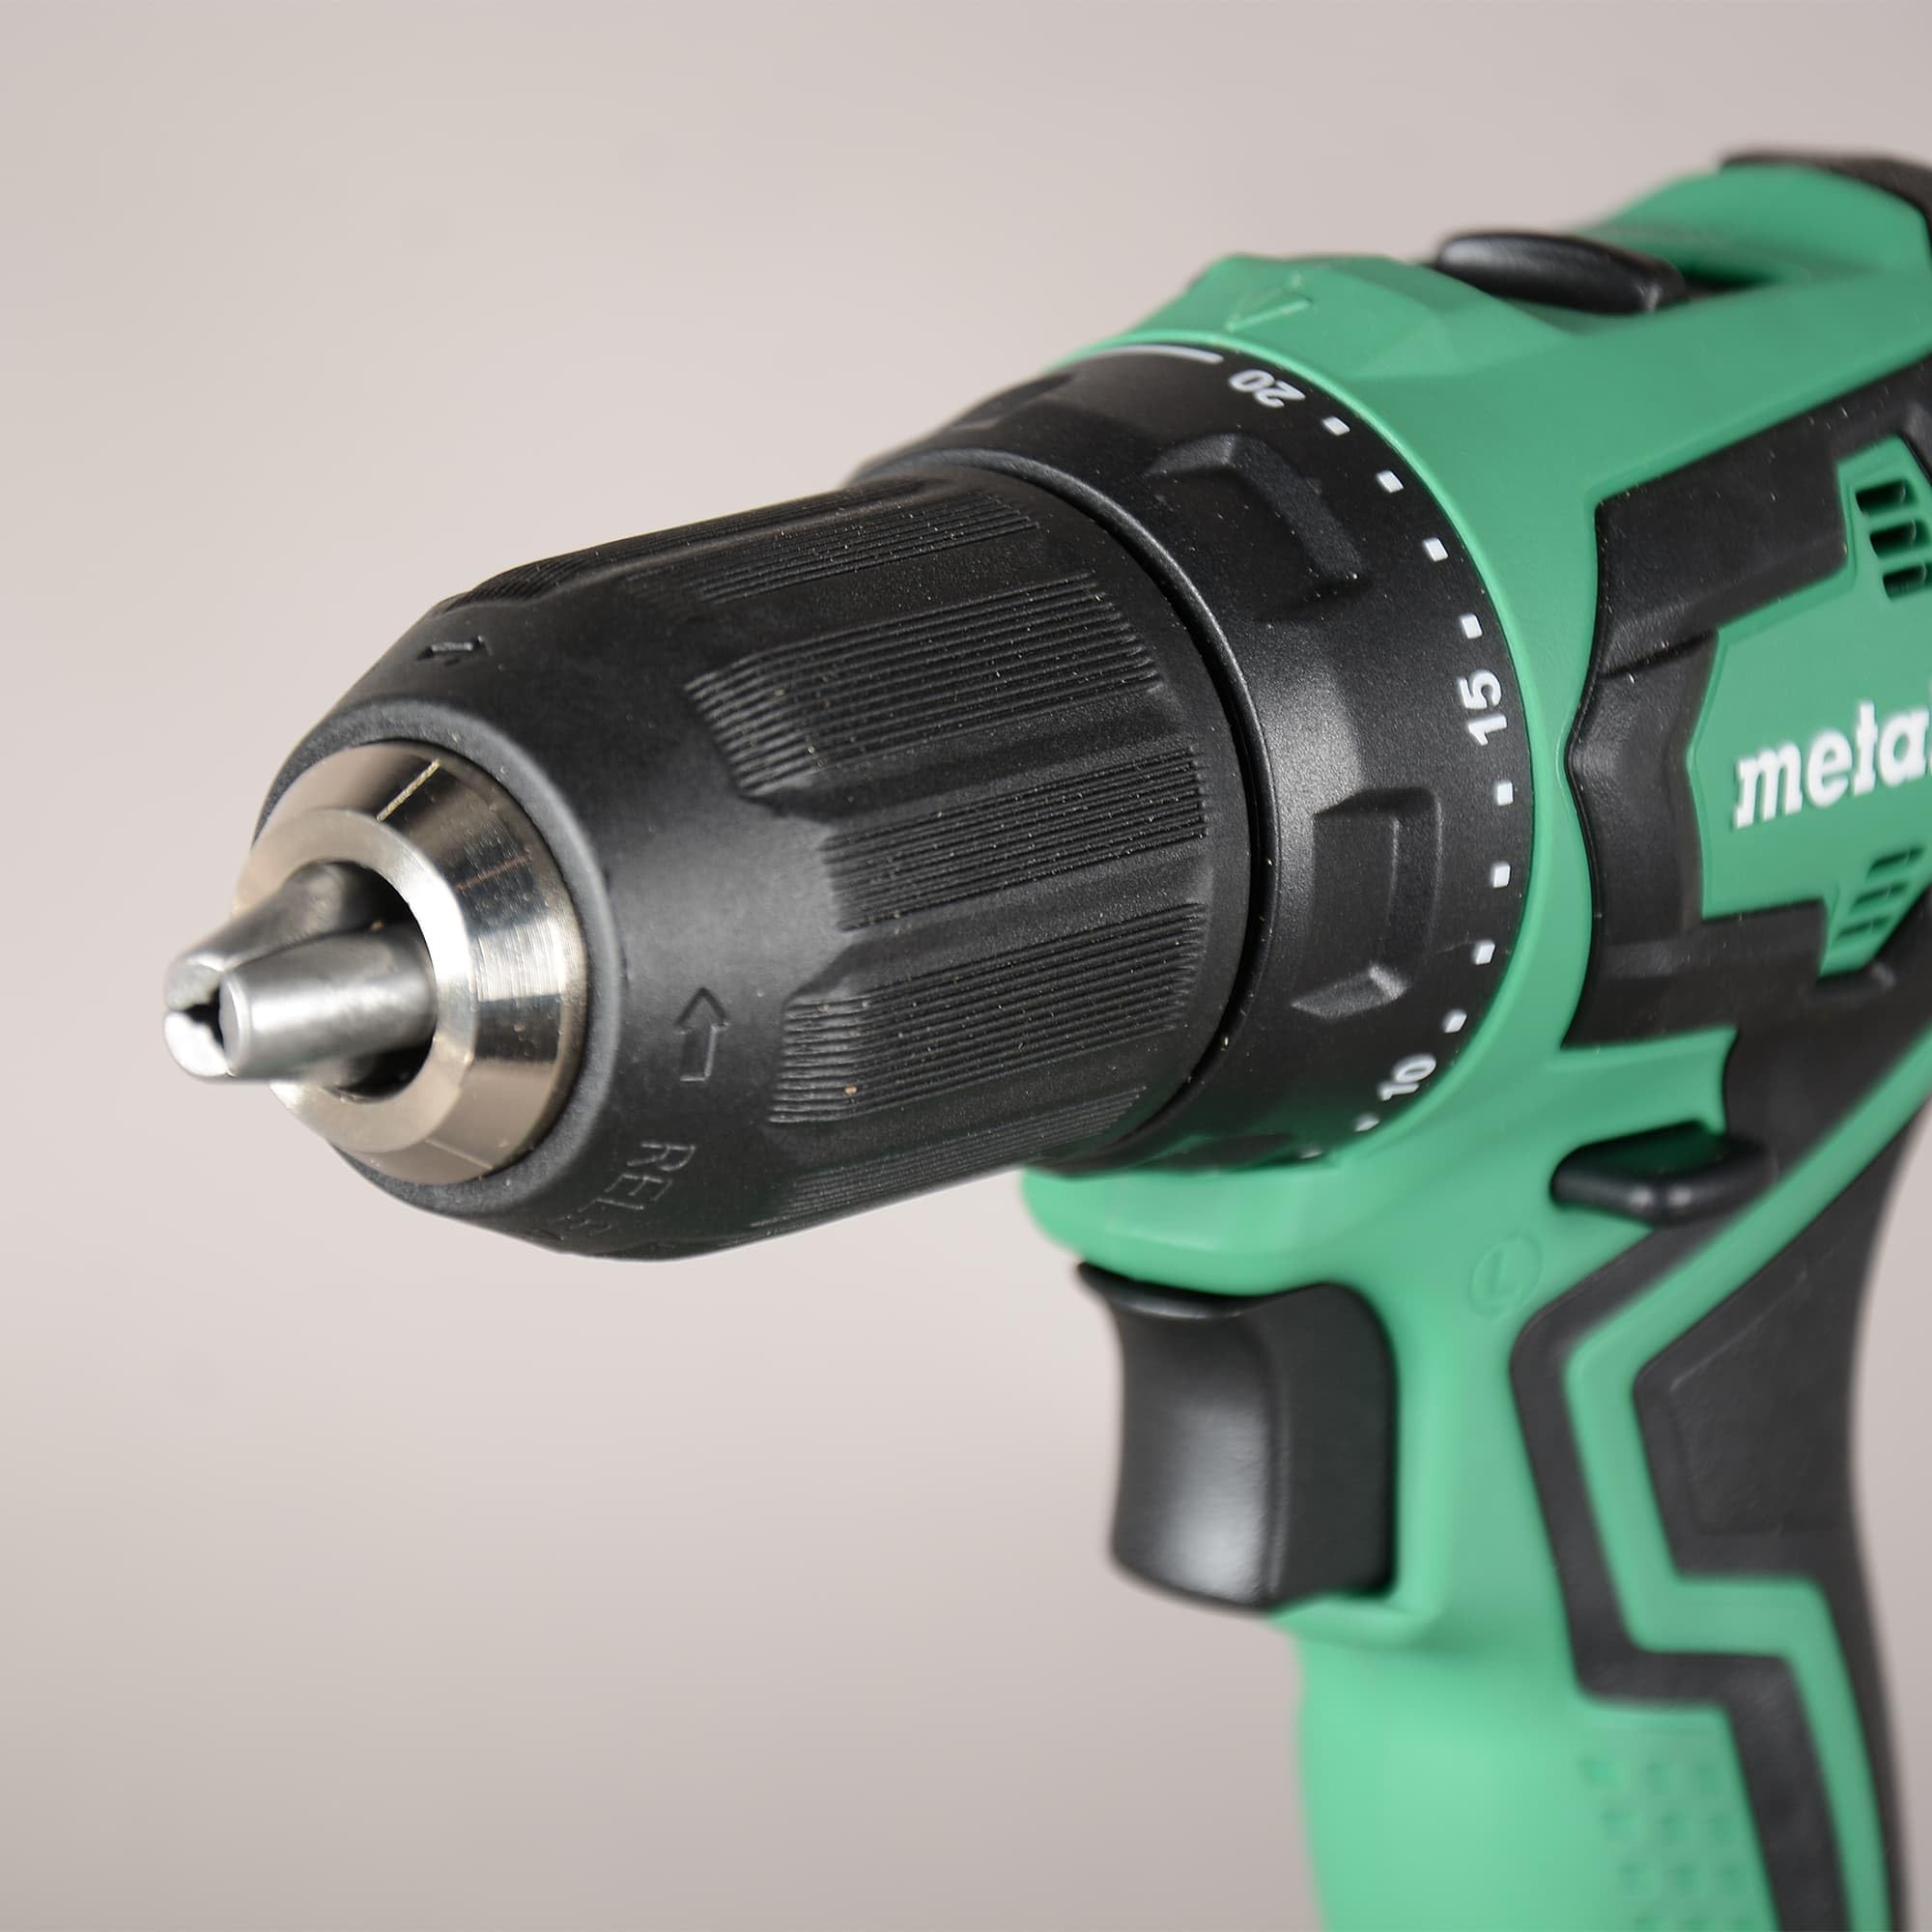 Metabo HPT 18V MultiVolt™ Cordless Sub-Compact Driver Drill Kit | Includes 2-18V, 2.0 Ah Batteries with Fuel Gauge | 485 in-lbs of Torque | Lifetime Tool Warranty | DS18DDXS